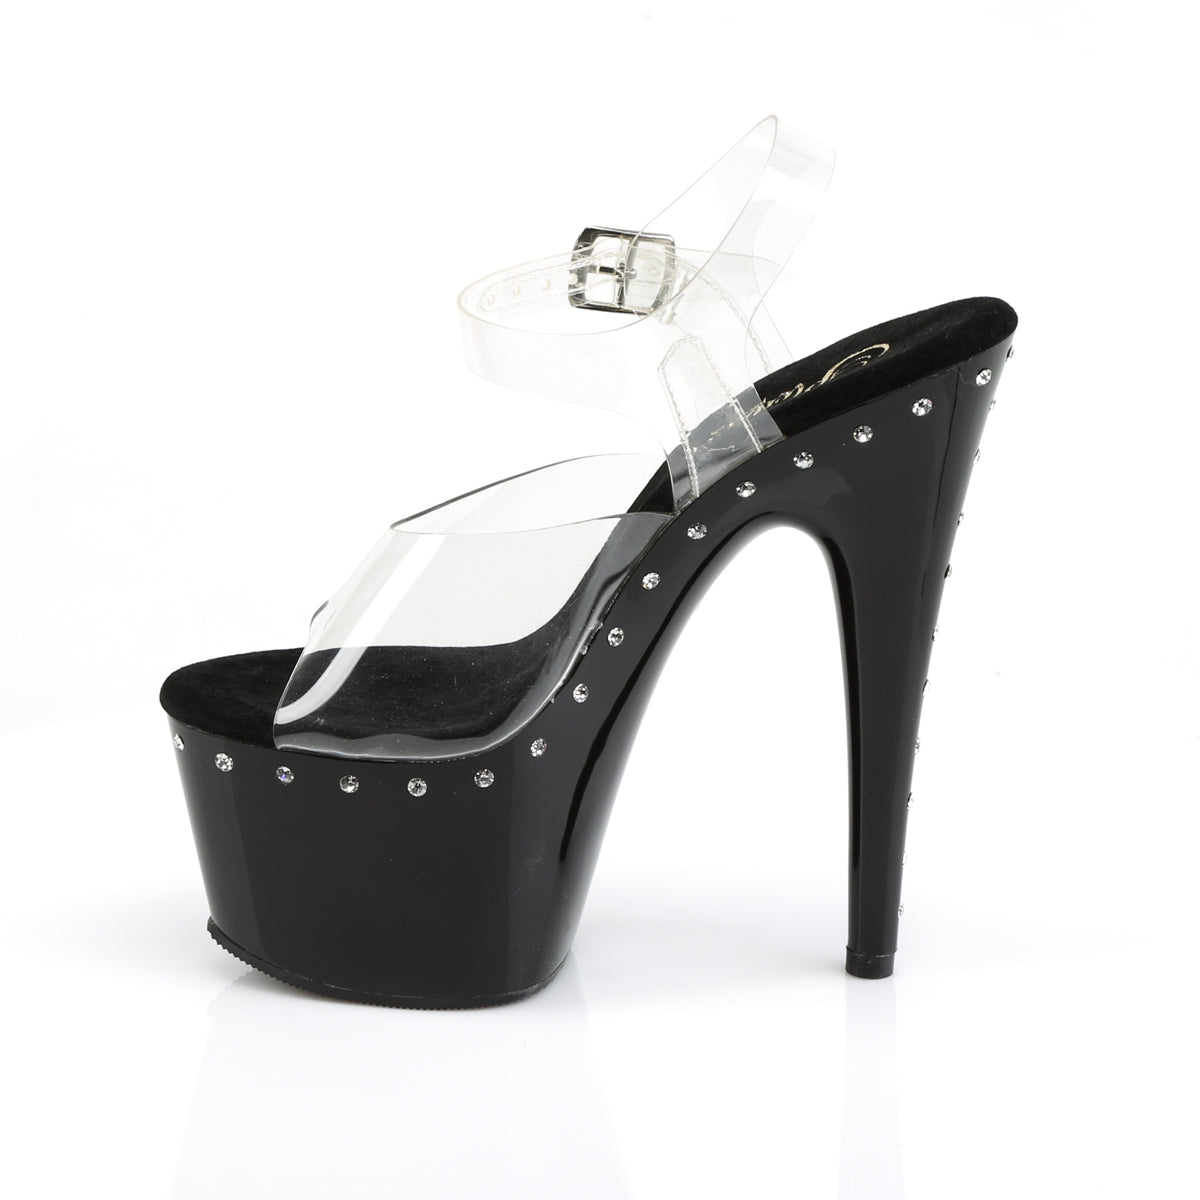 ADORE-708LS 7" Heel Clear and Black Pole Dancing Shoes-Pleaser- Sexy Shoes Pole Dance Heels